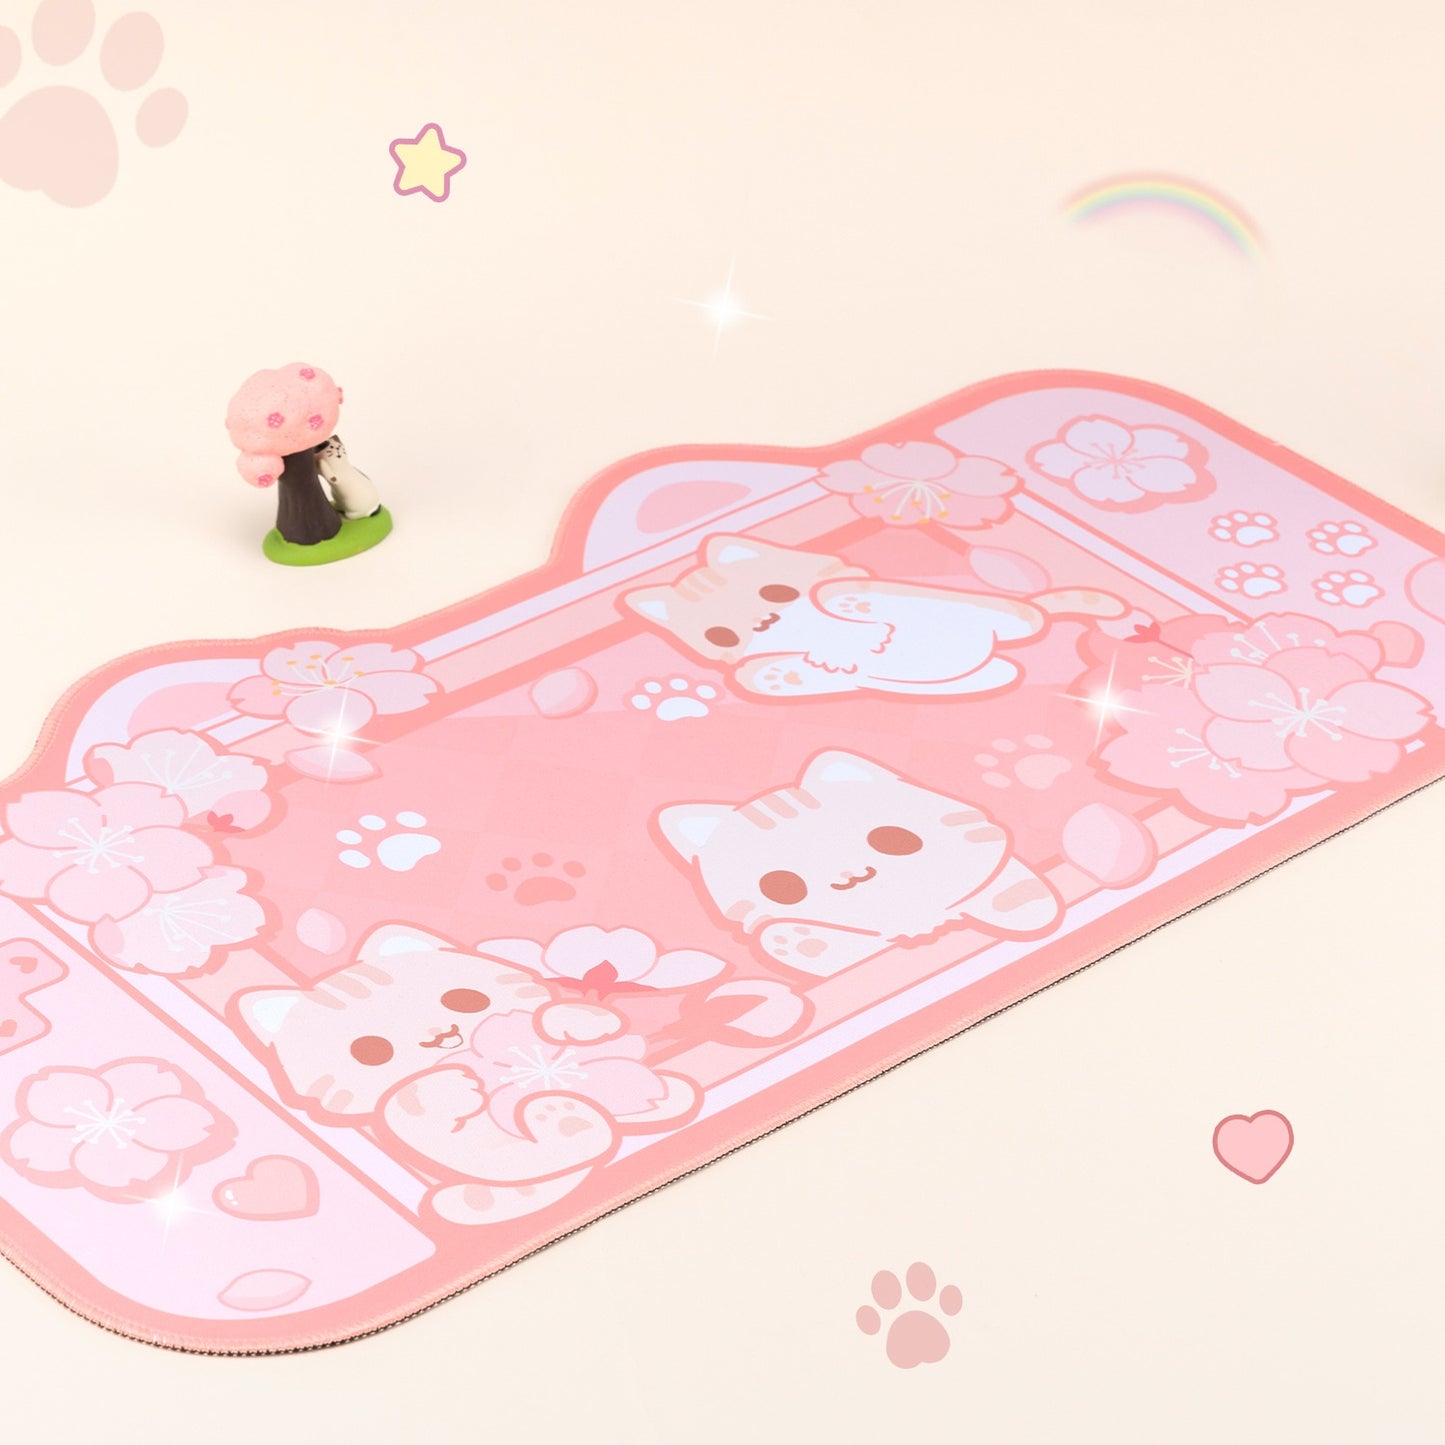 Kawaii Pink Cats in a Game Console Desk Pad